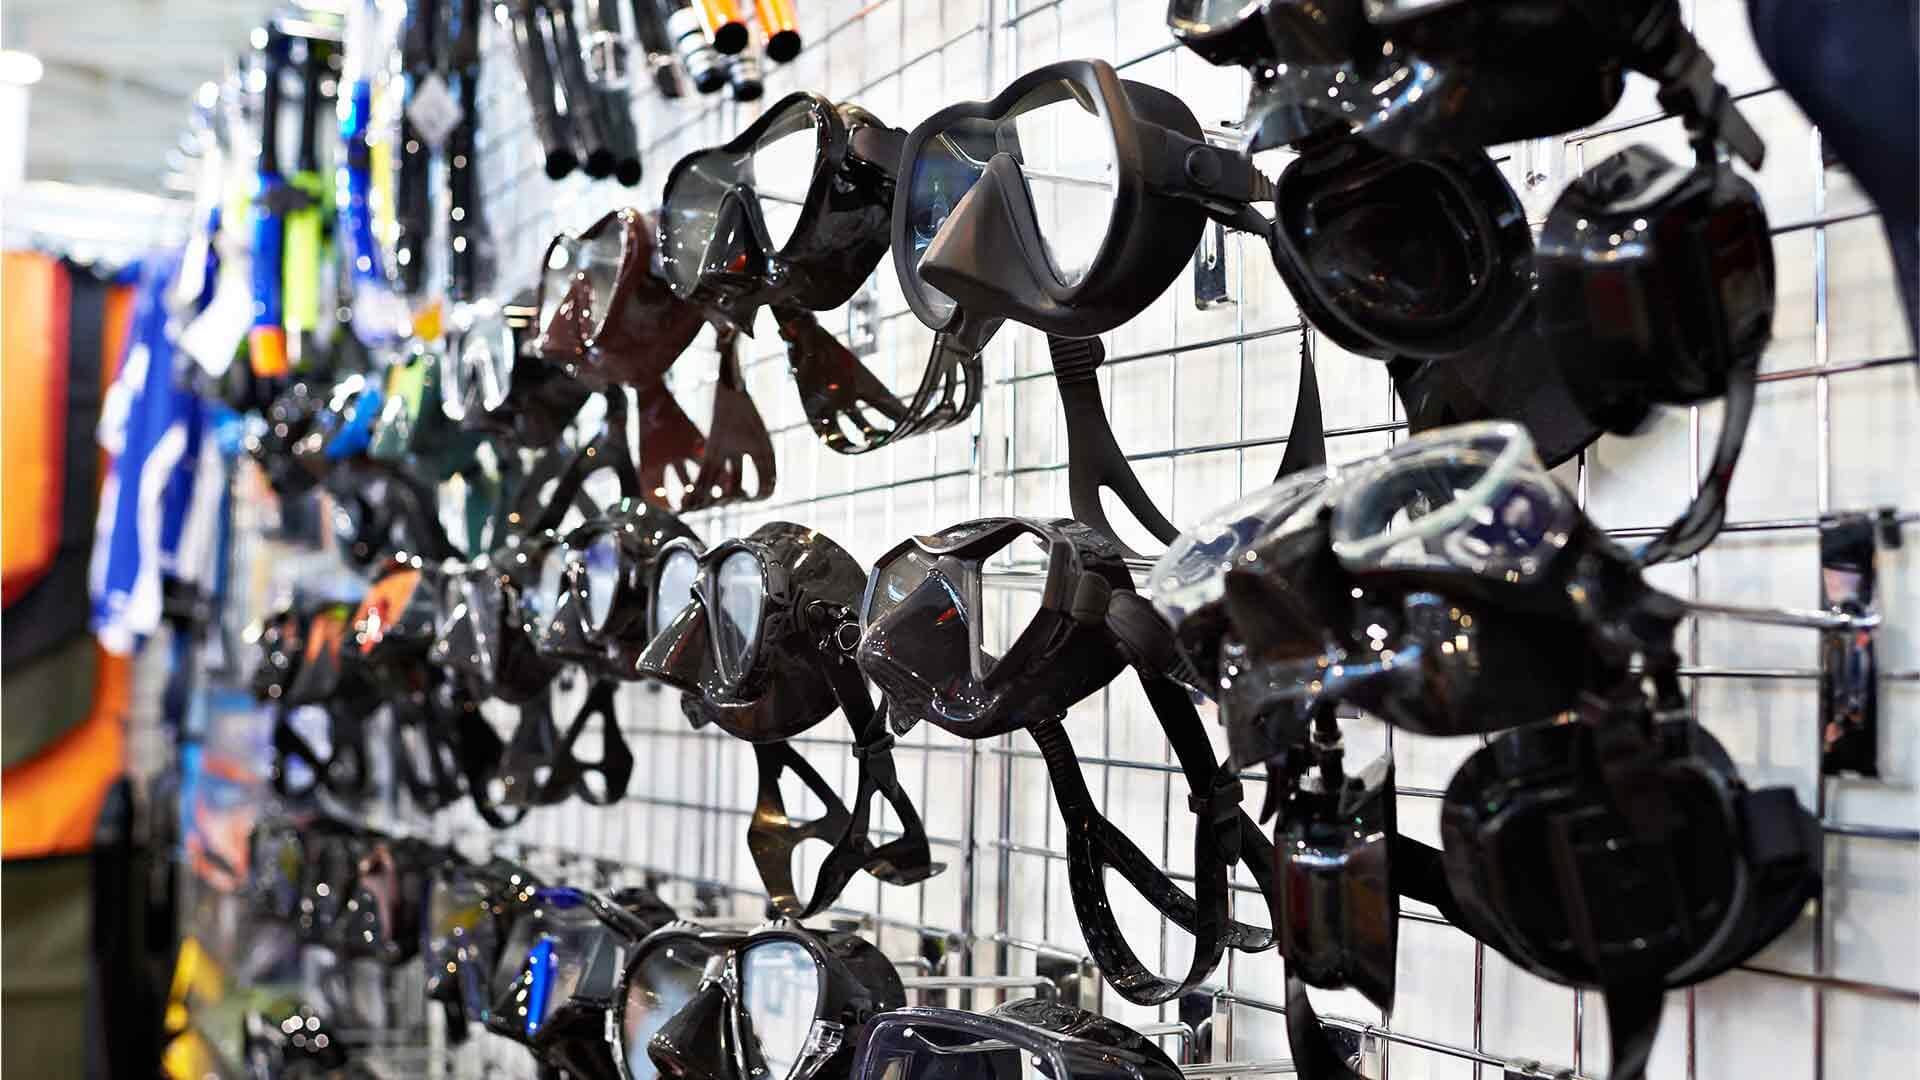 How to Buy a Scuba Diving Mask?